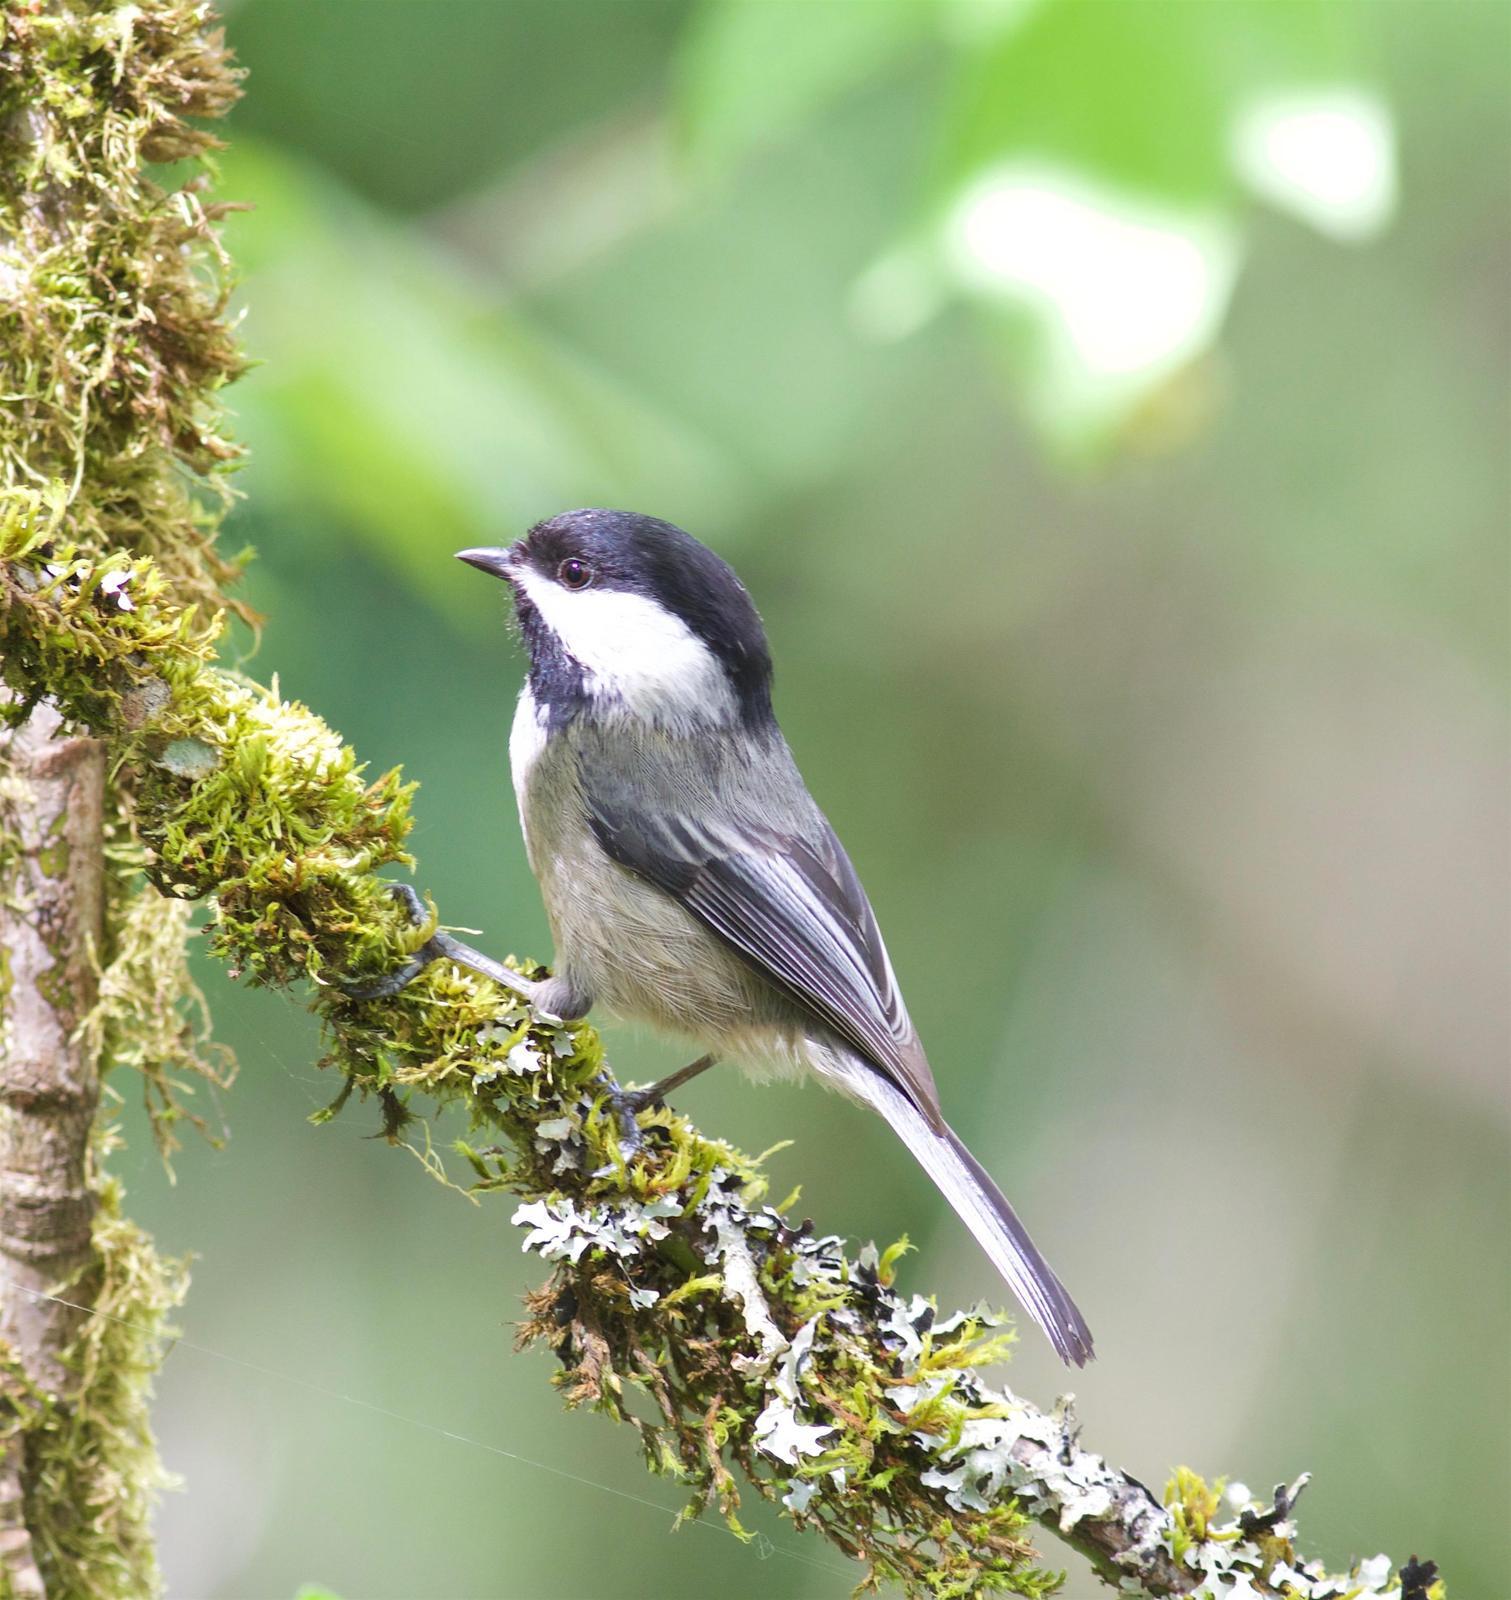 Black-capped Chickadee Photo by Kathryn Keith